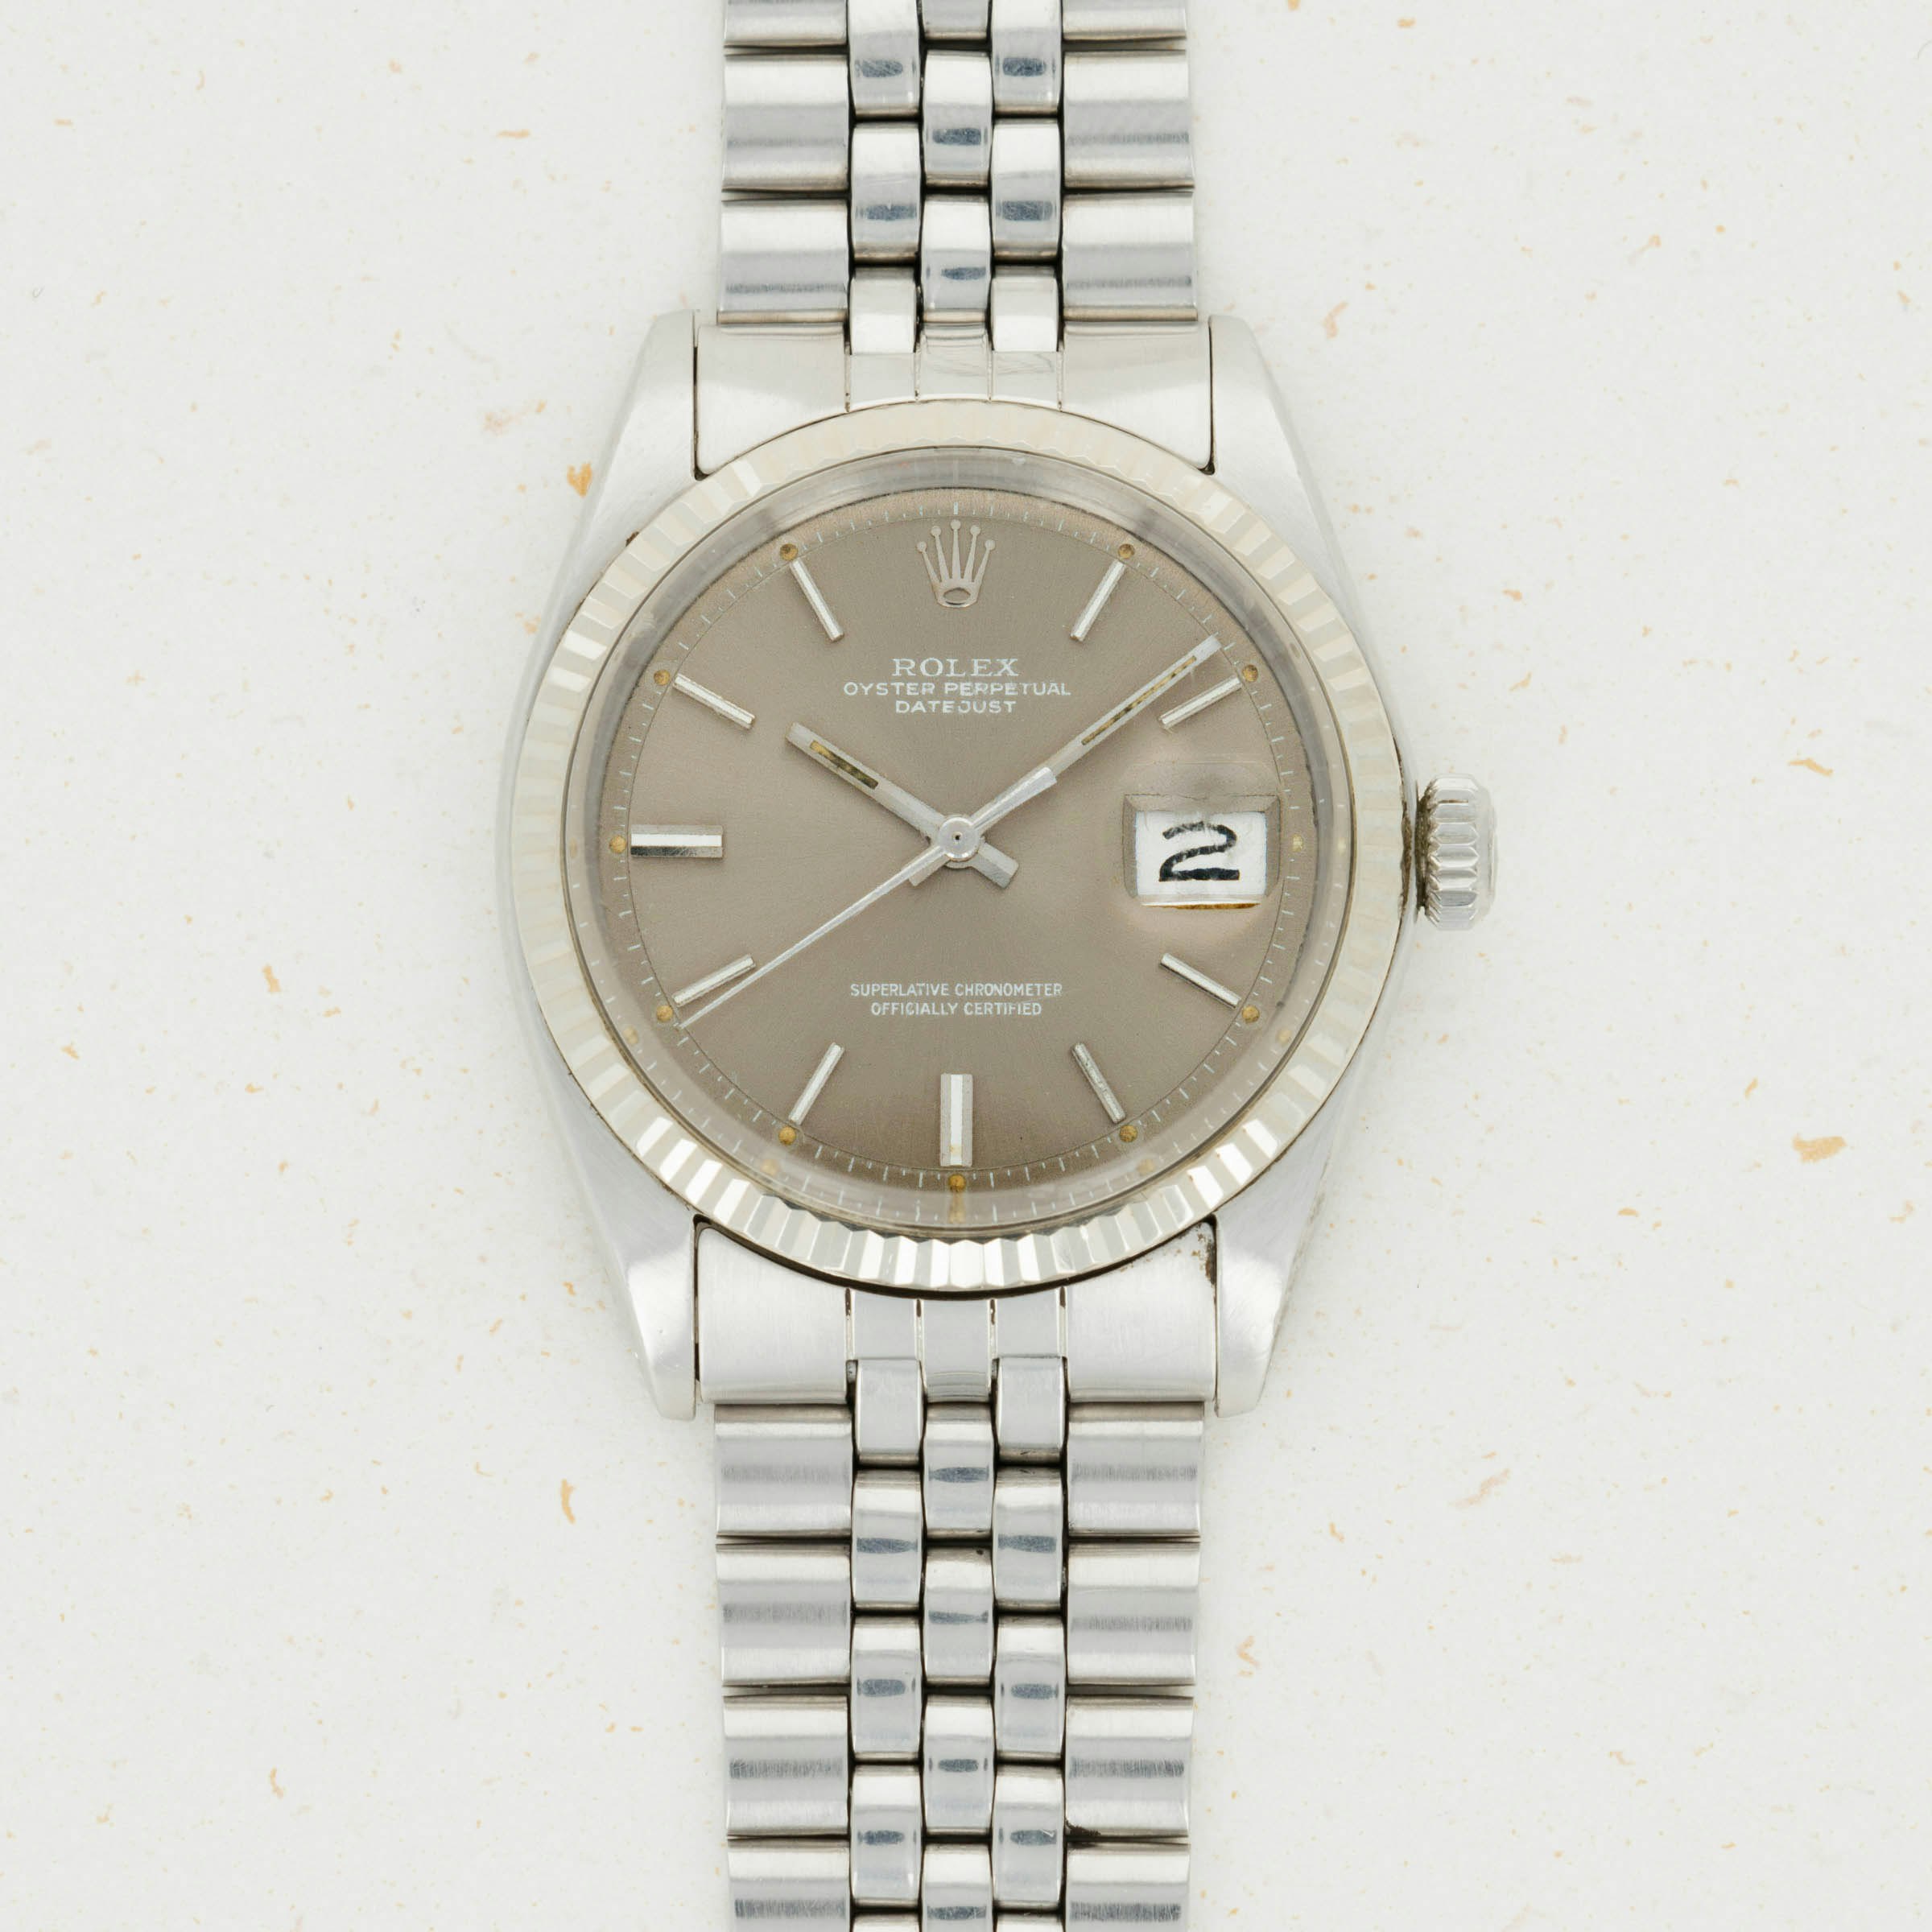 Thumbnail for Rolex Datejust 1601 Slate Dial